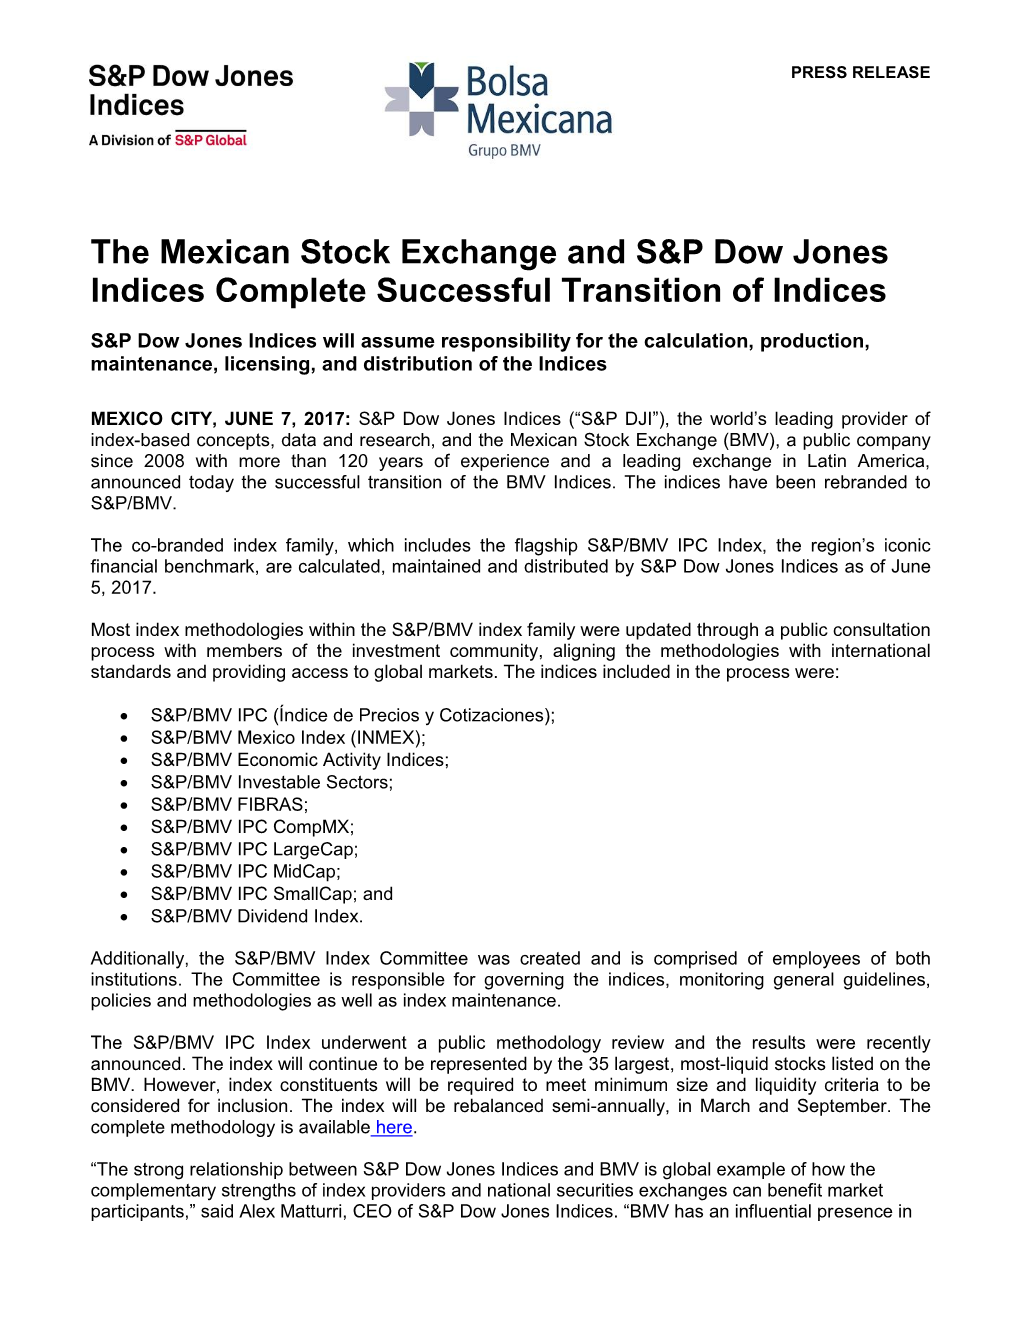 The Mexican Stock Exchange and S&P Dow Jones Indices Complete